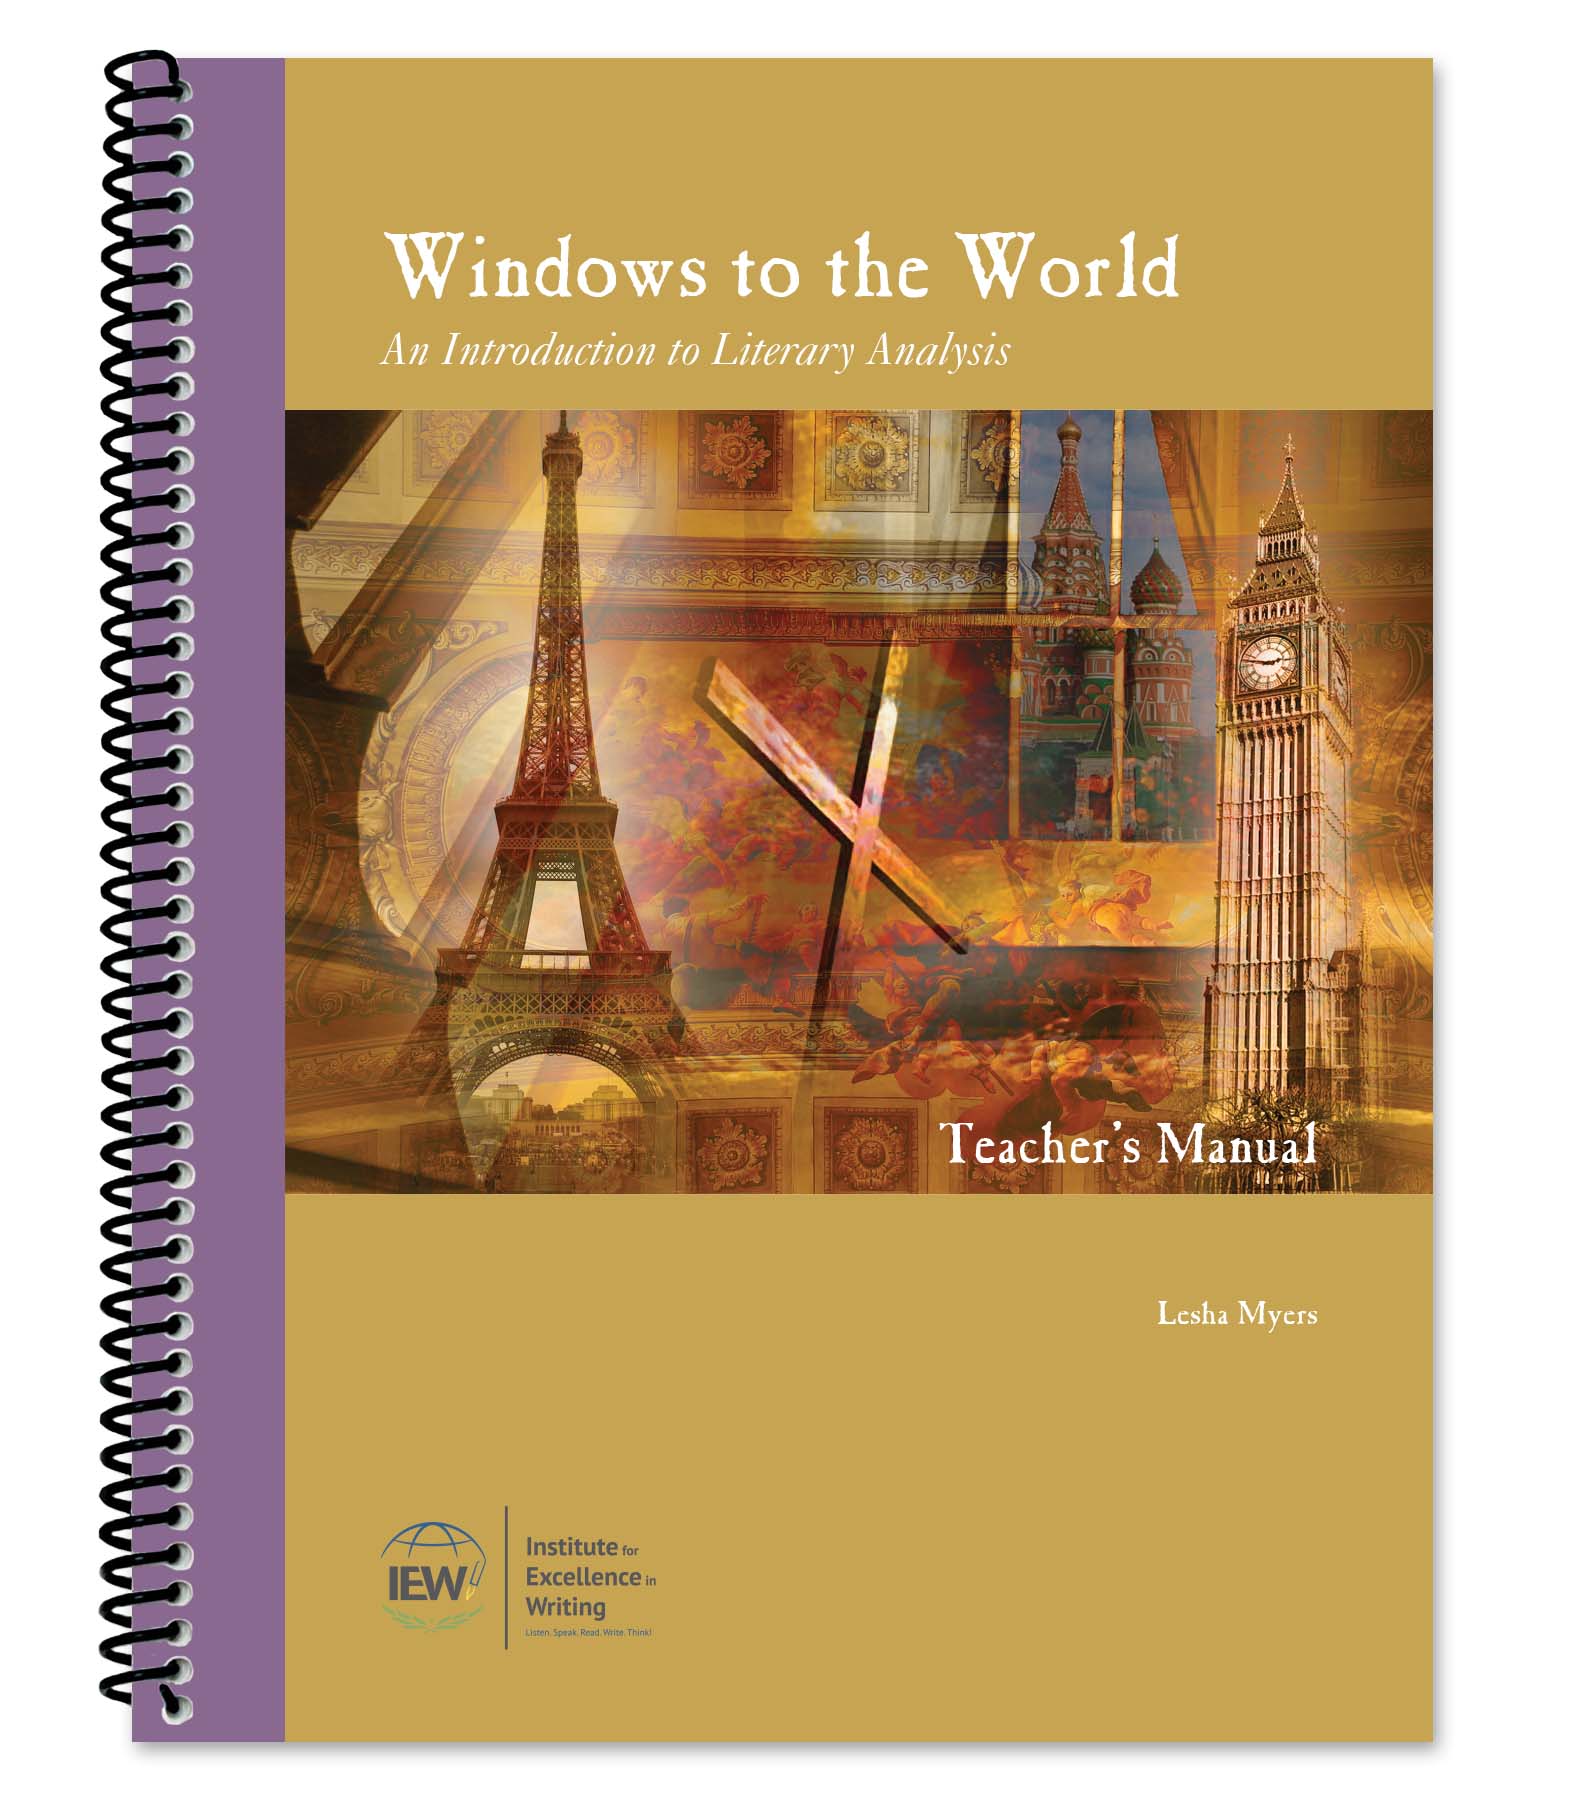 Windows to the World: An Introduction to Literary Analysis [Teacher's Manual only]